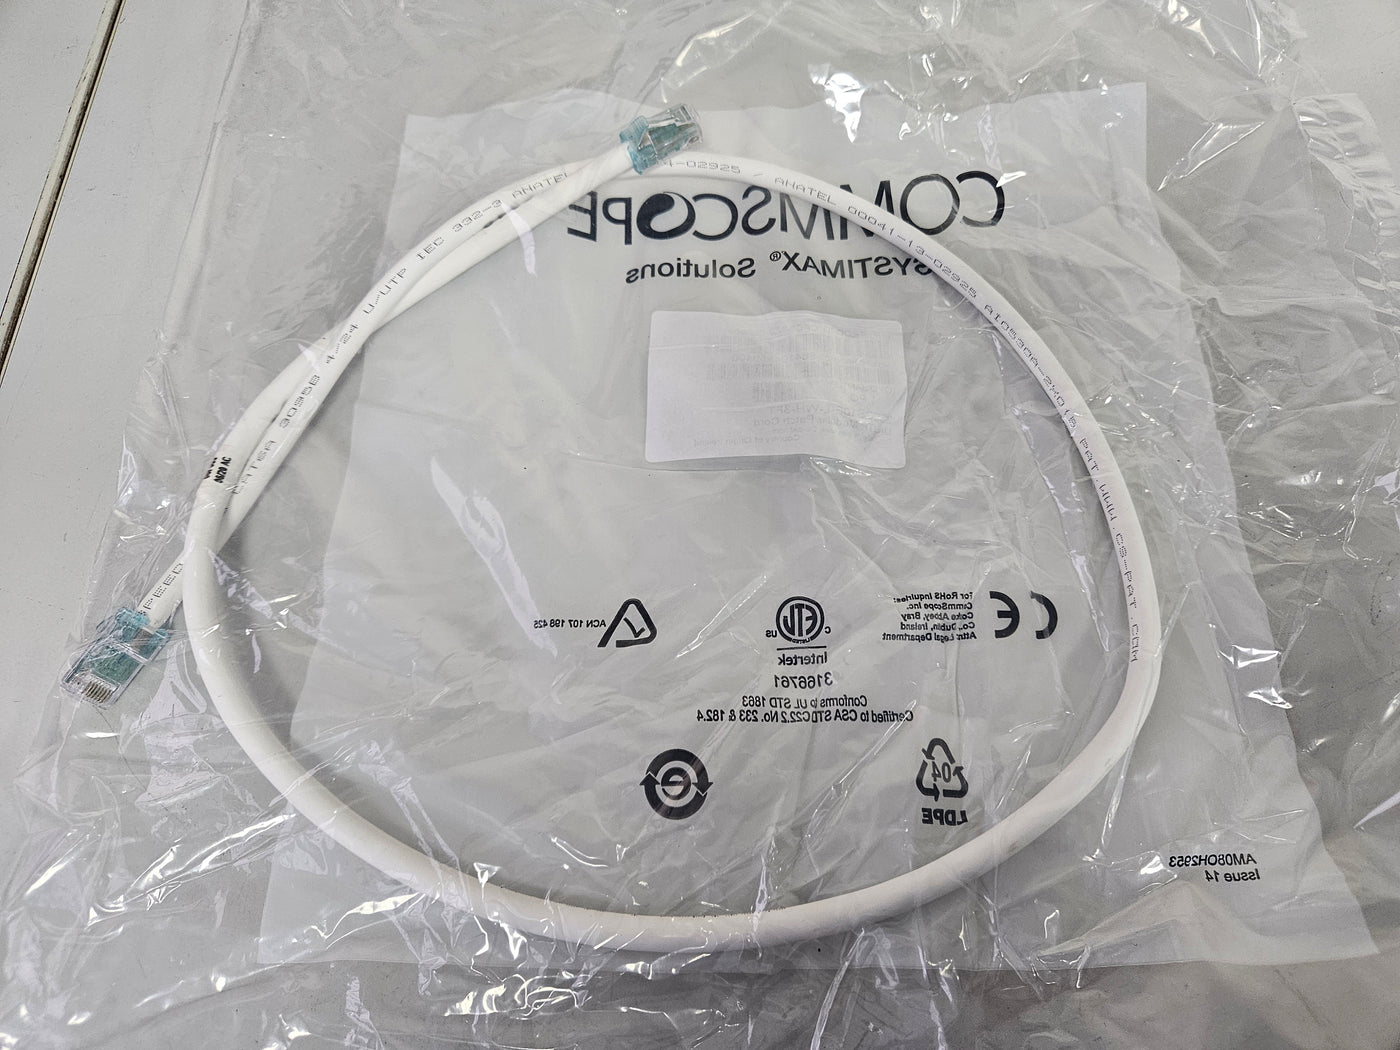 COMMSCOPE SYSTIMAX Modular Patch Cord - White 3ft ( CPCSSZ2-08F003 360GS10E-L-WH-3FT ) NEW